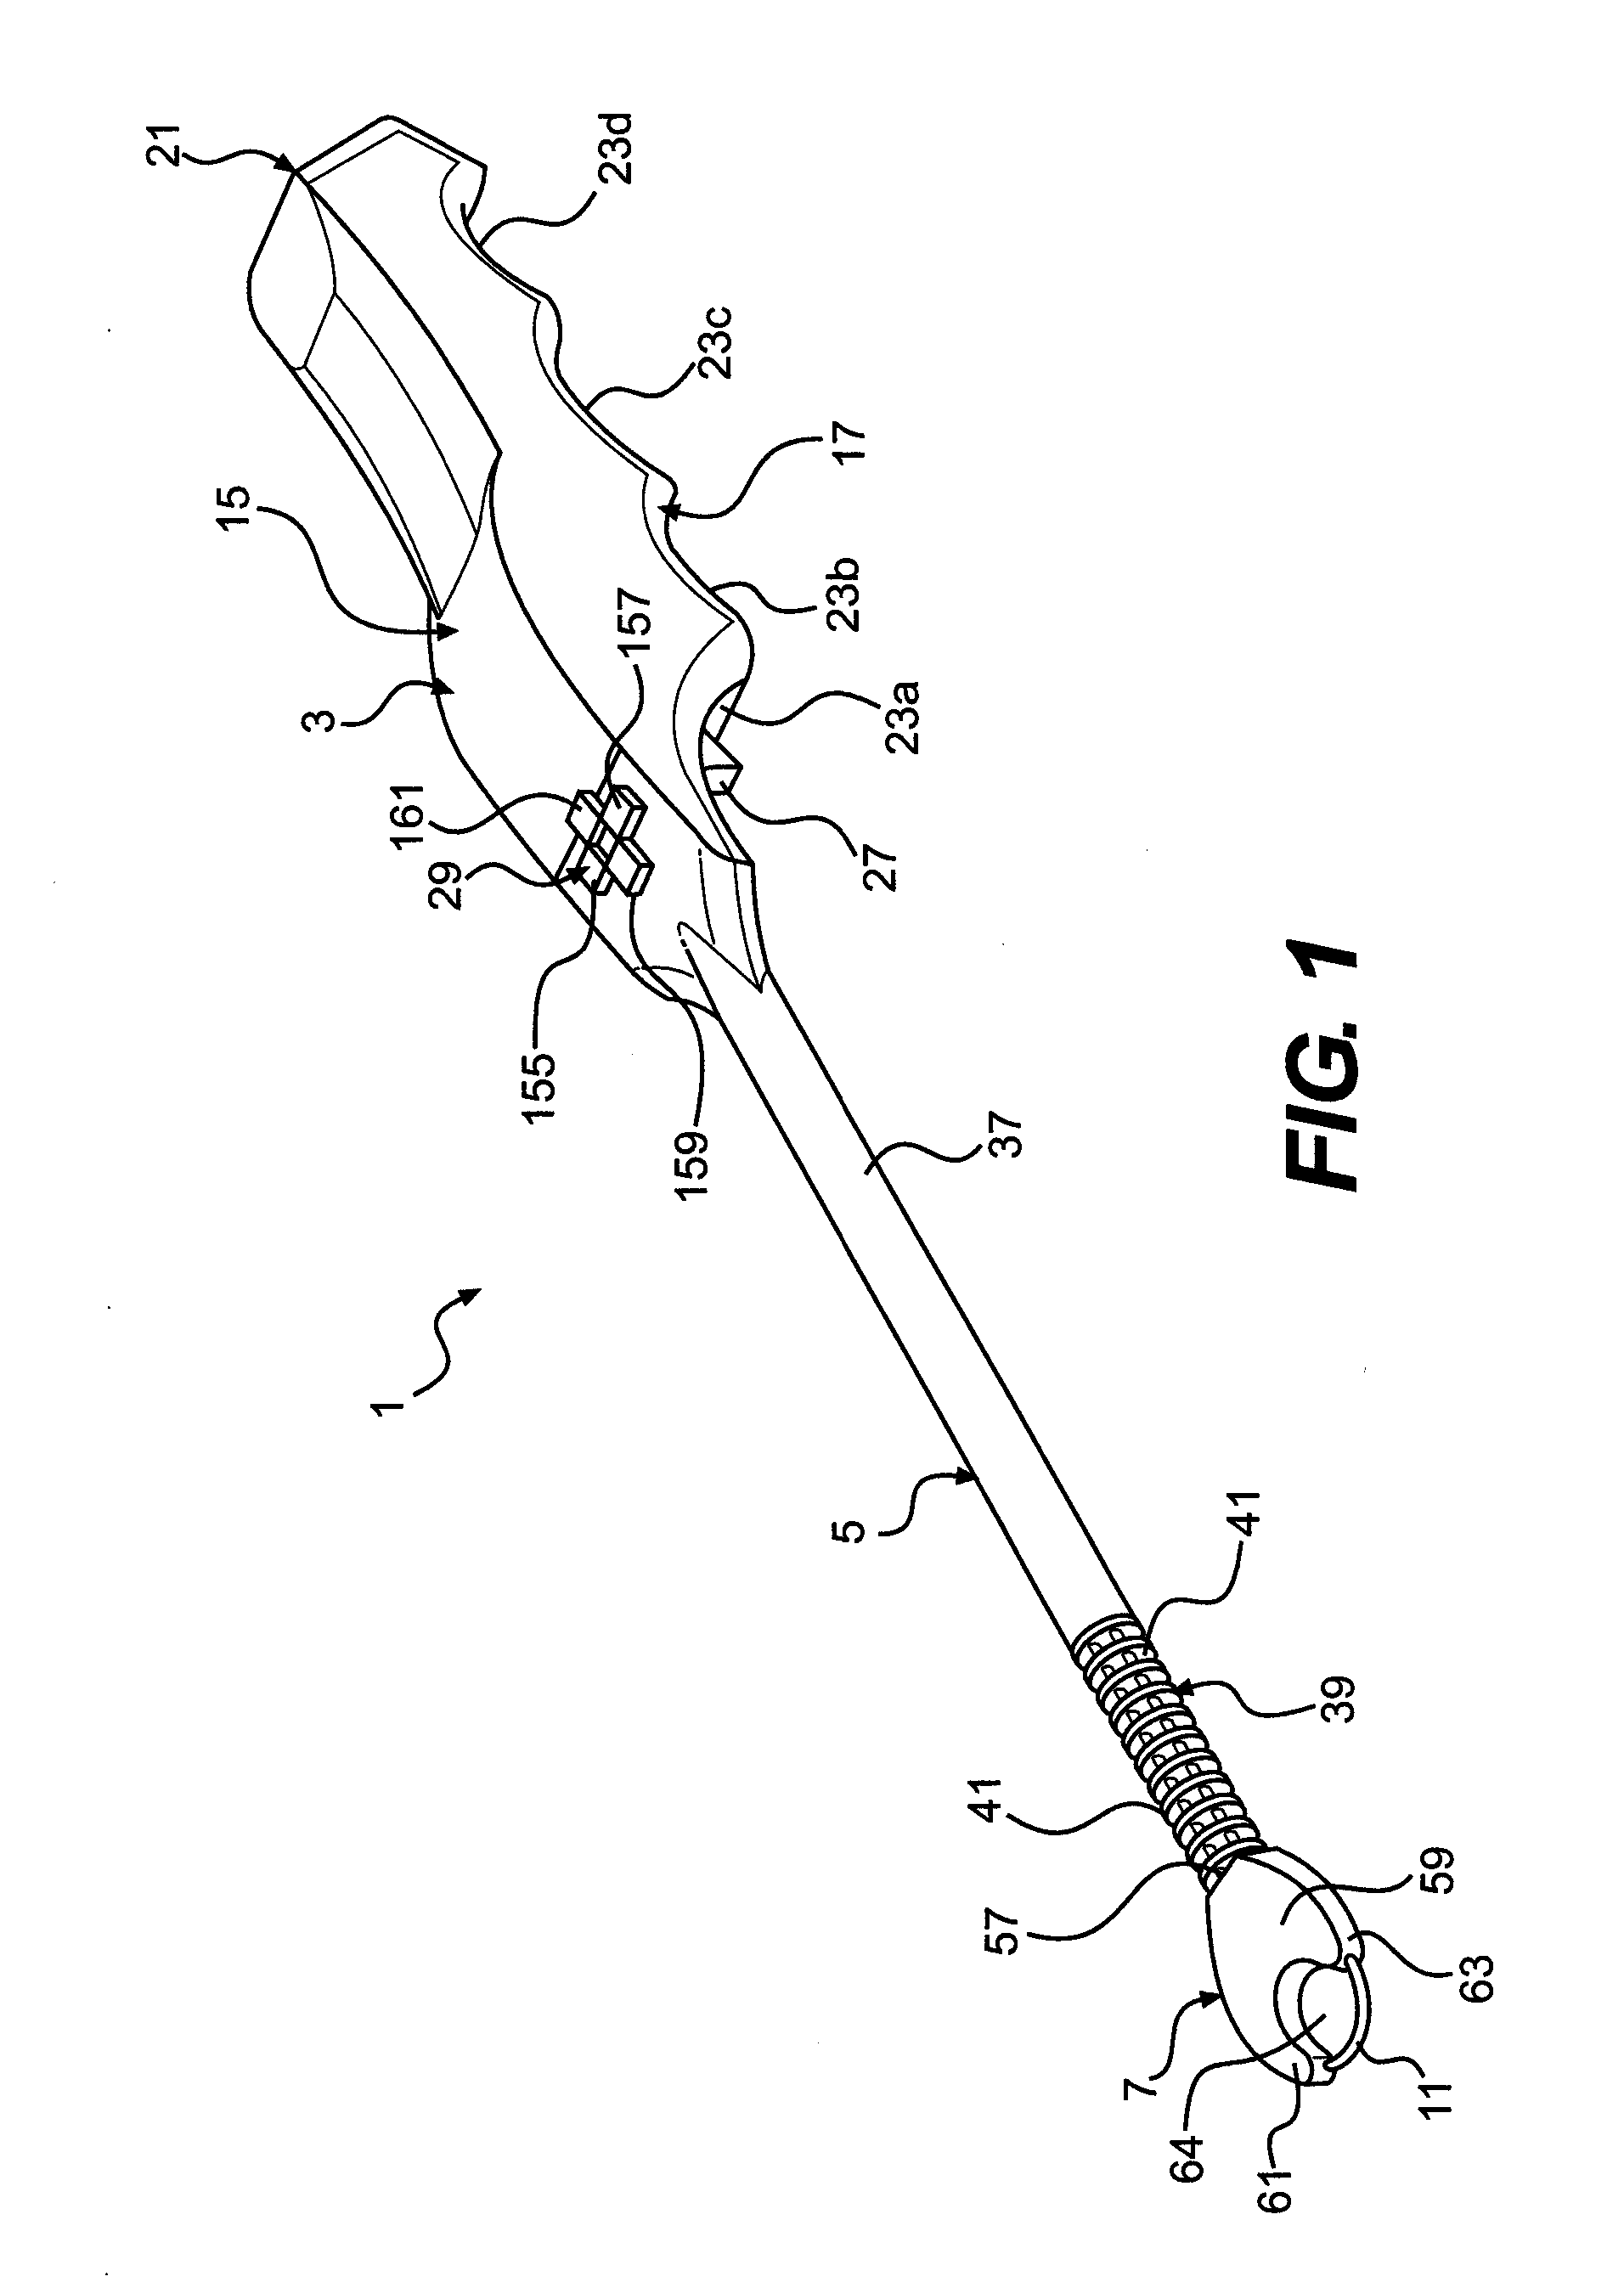 Suturing and knot-tying device